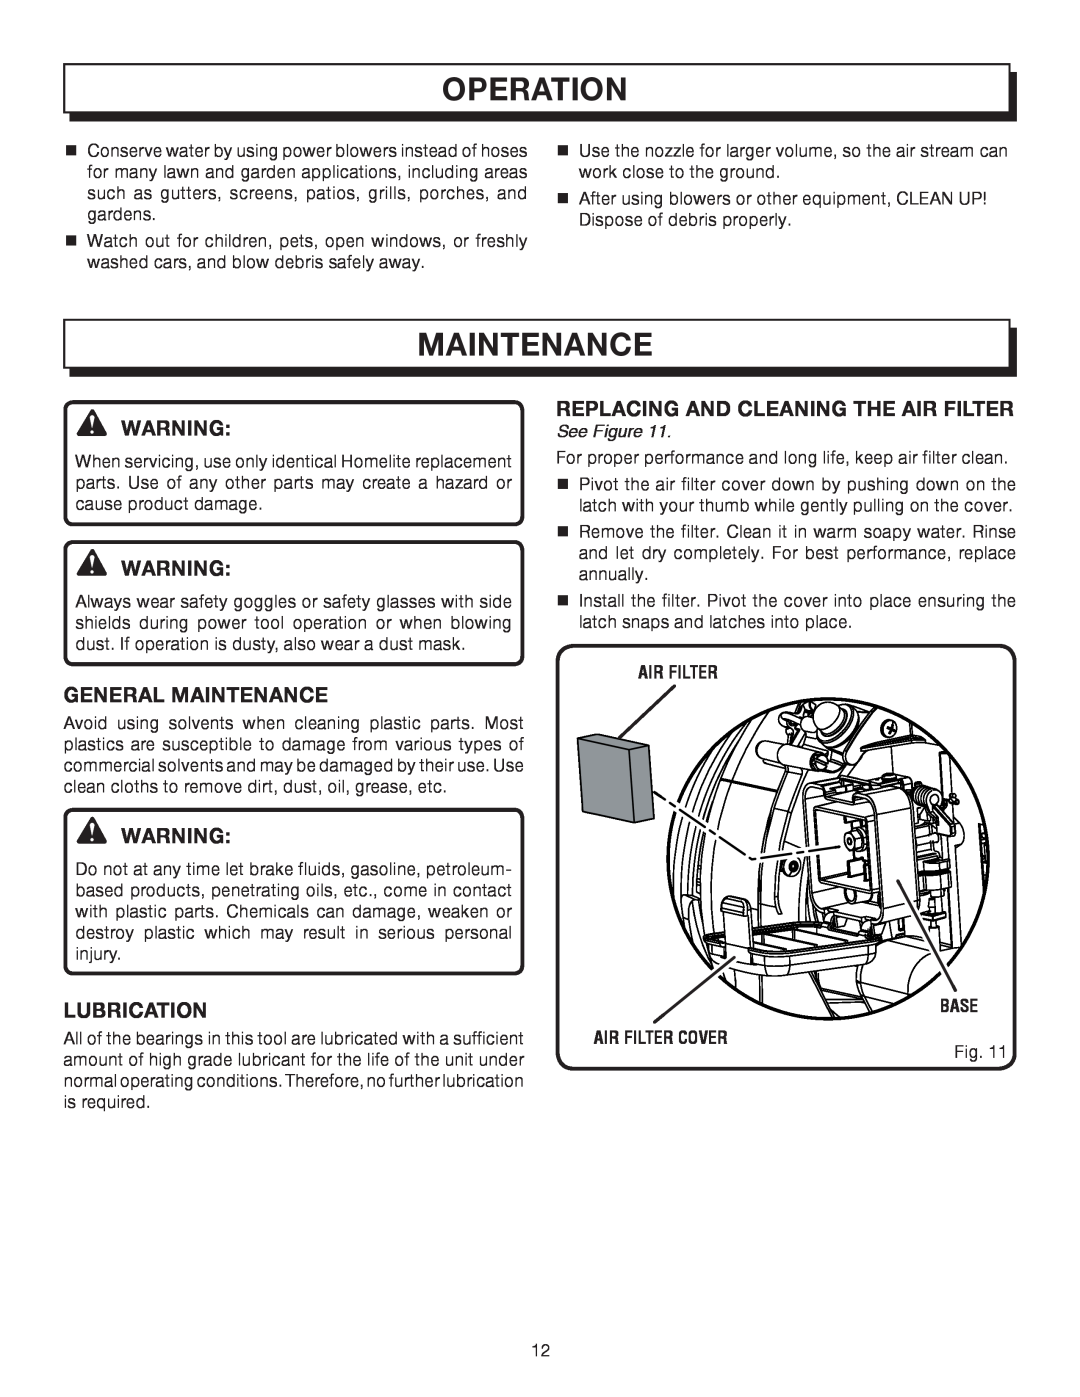 Homelite UT08572A manual Operation, General Maintenance, Lubrication, Replacing And Cleaning The Air Filter, See Figure 